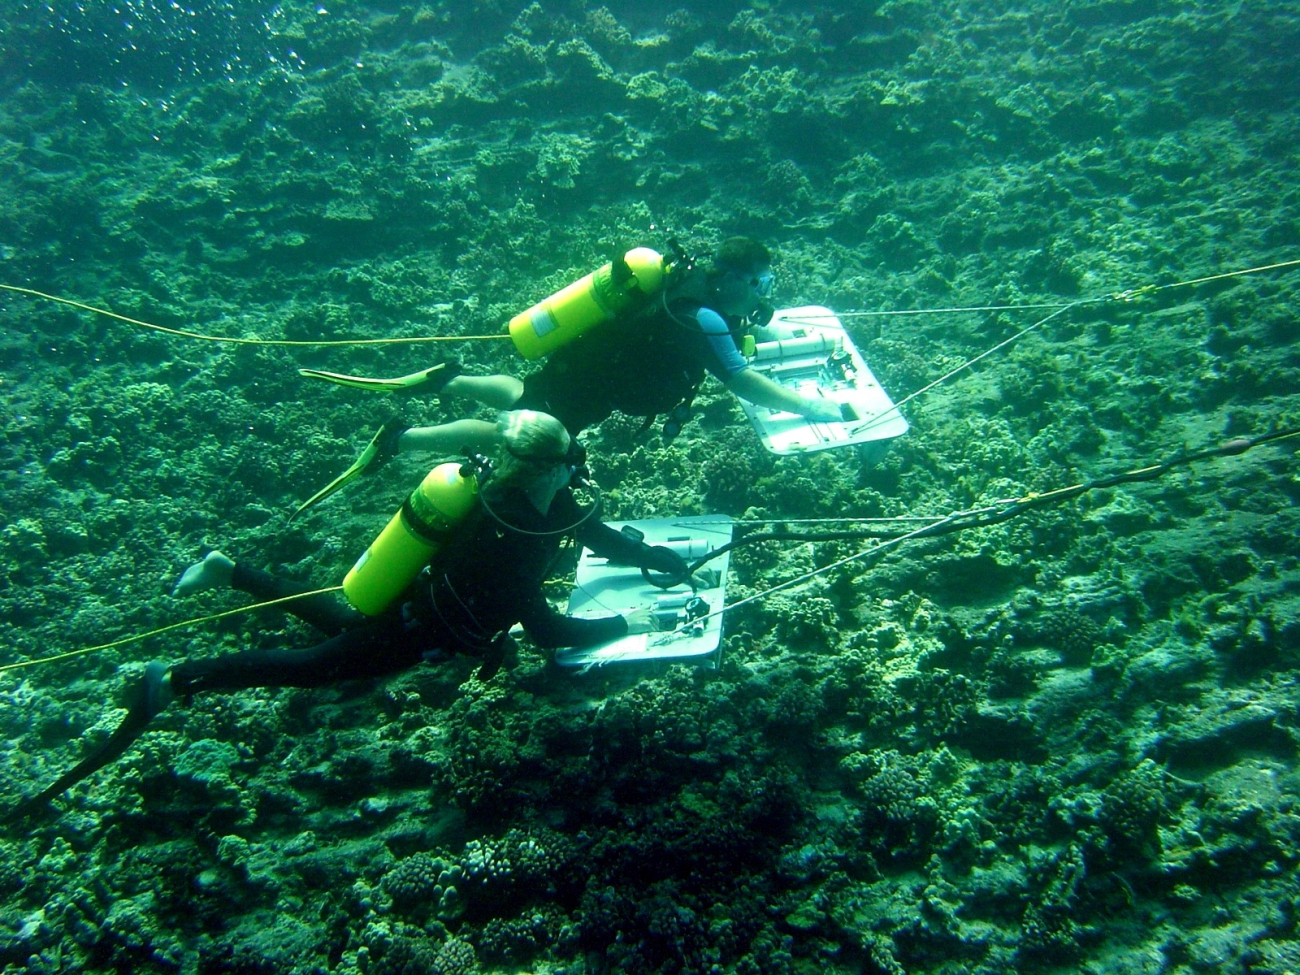 Two divers are towed behind a small boat in order to survey a large area ofcoral reef